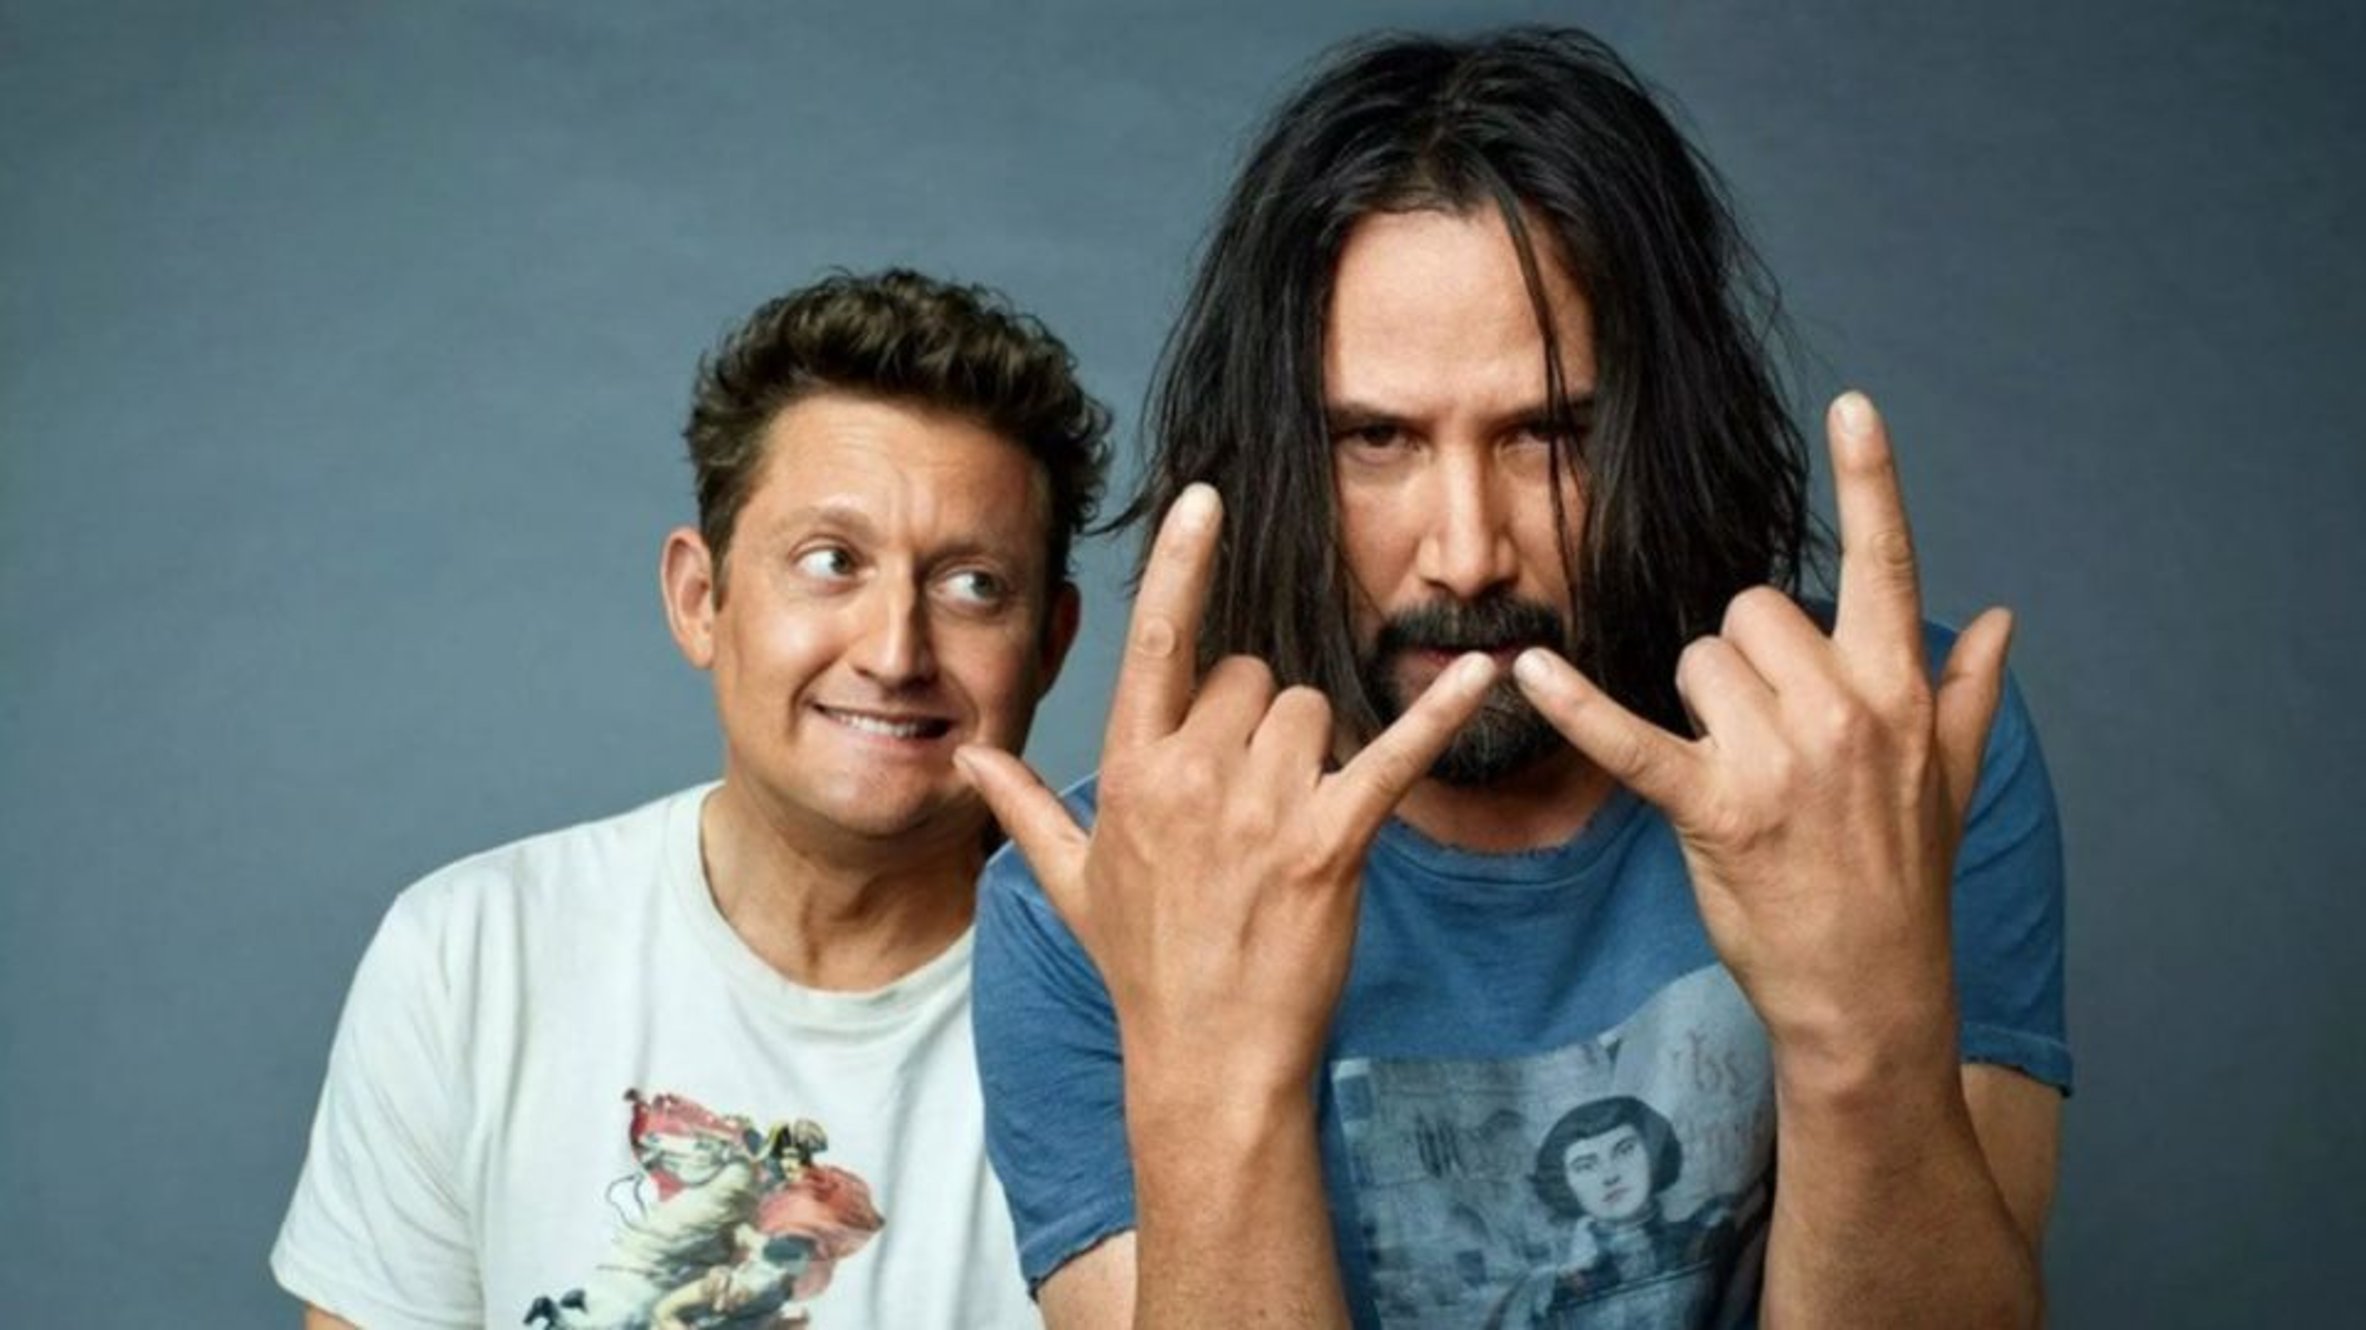 Bill & Ted 3 is Casting for Featured Roles!